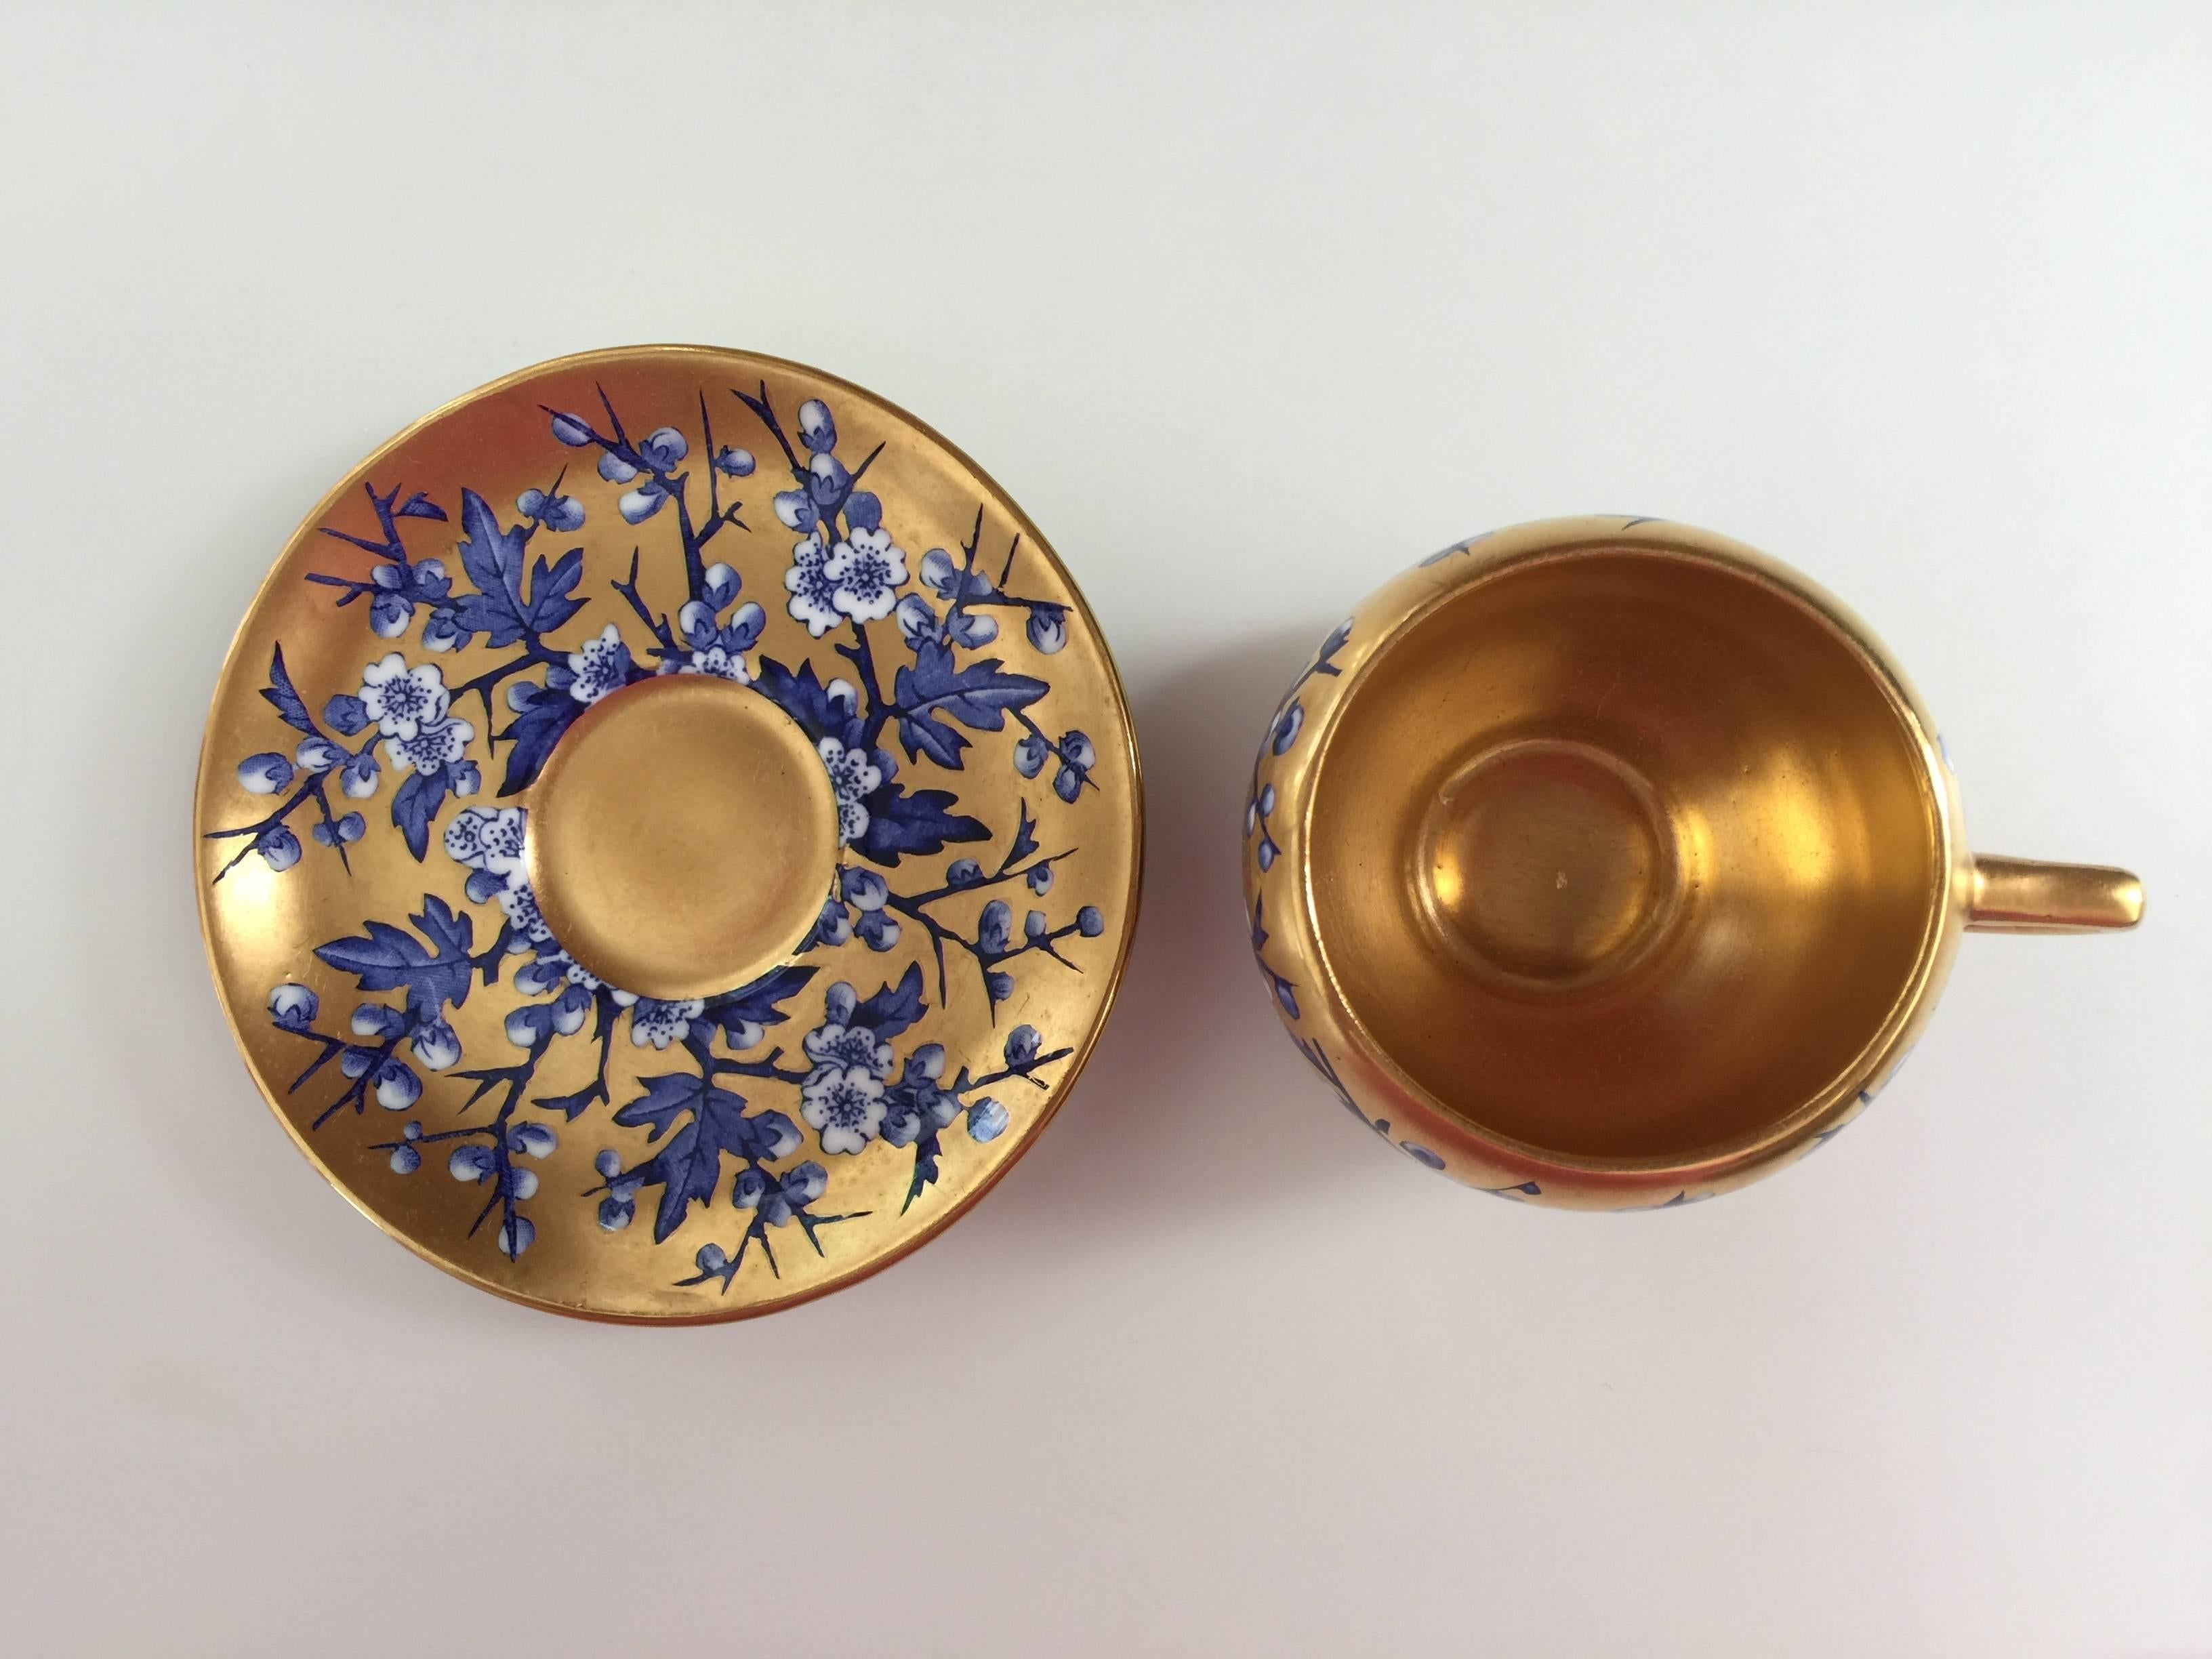 Coalport porcelain cup and saucer, mid-18th century
Gilt with blue flowers and leaves, dated 1750.